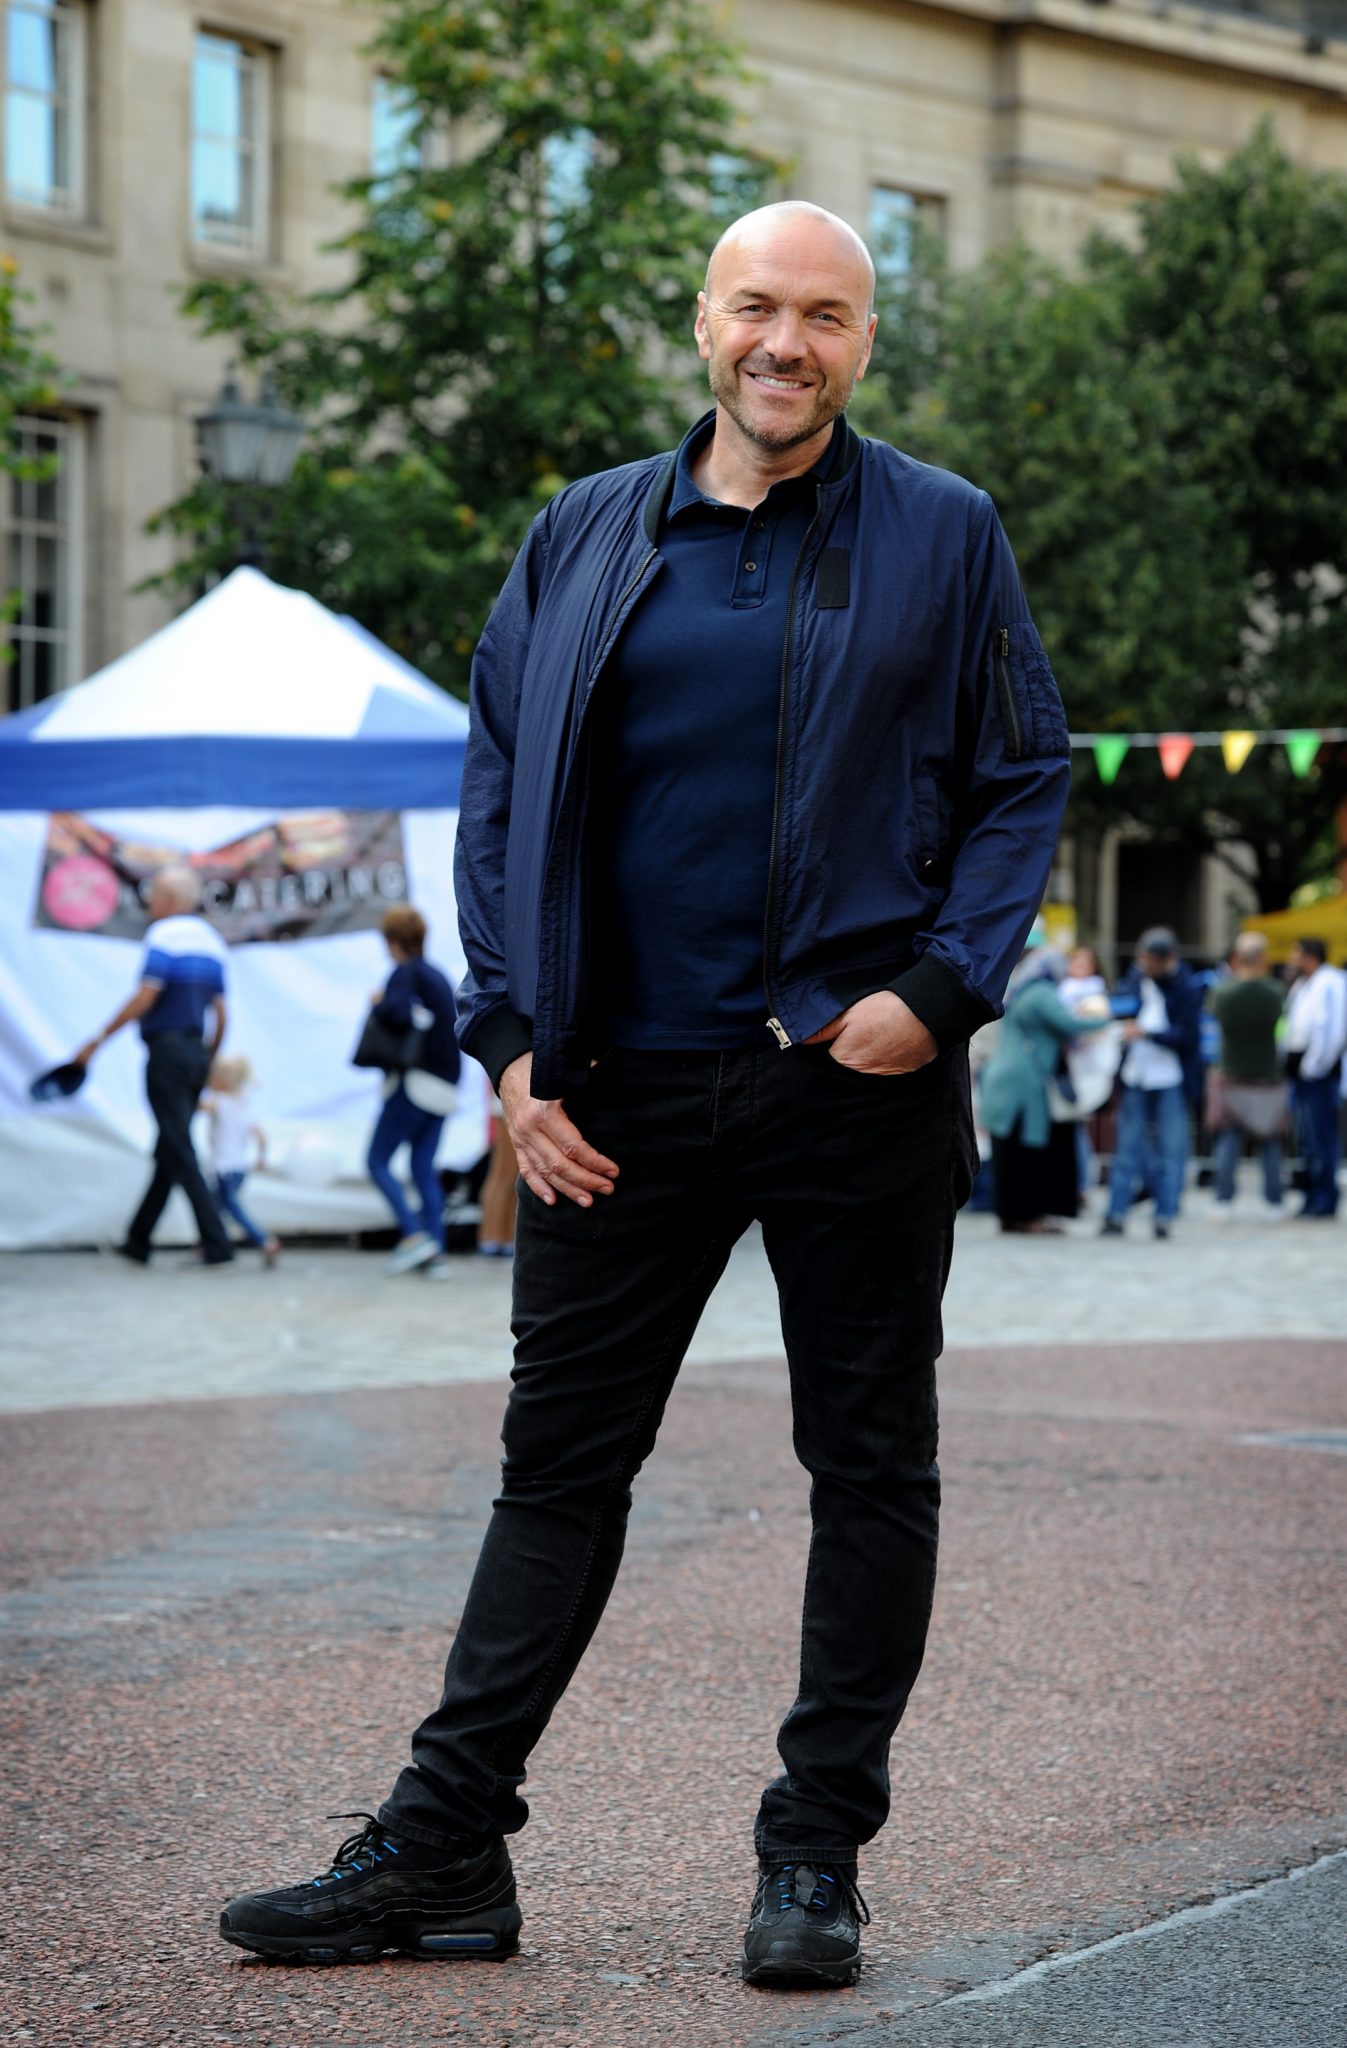 Day two of the annual Bolton Food and Drink Festival. Celebrity chef Simon Rimmer, that star attraction for the day. Picture by Paul Heyes, Saturday August 26, 2017.